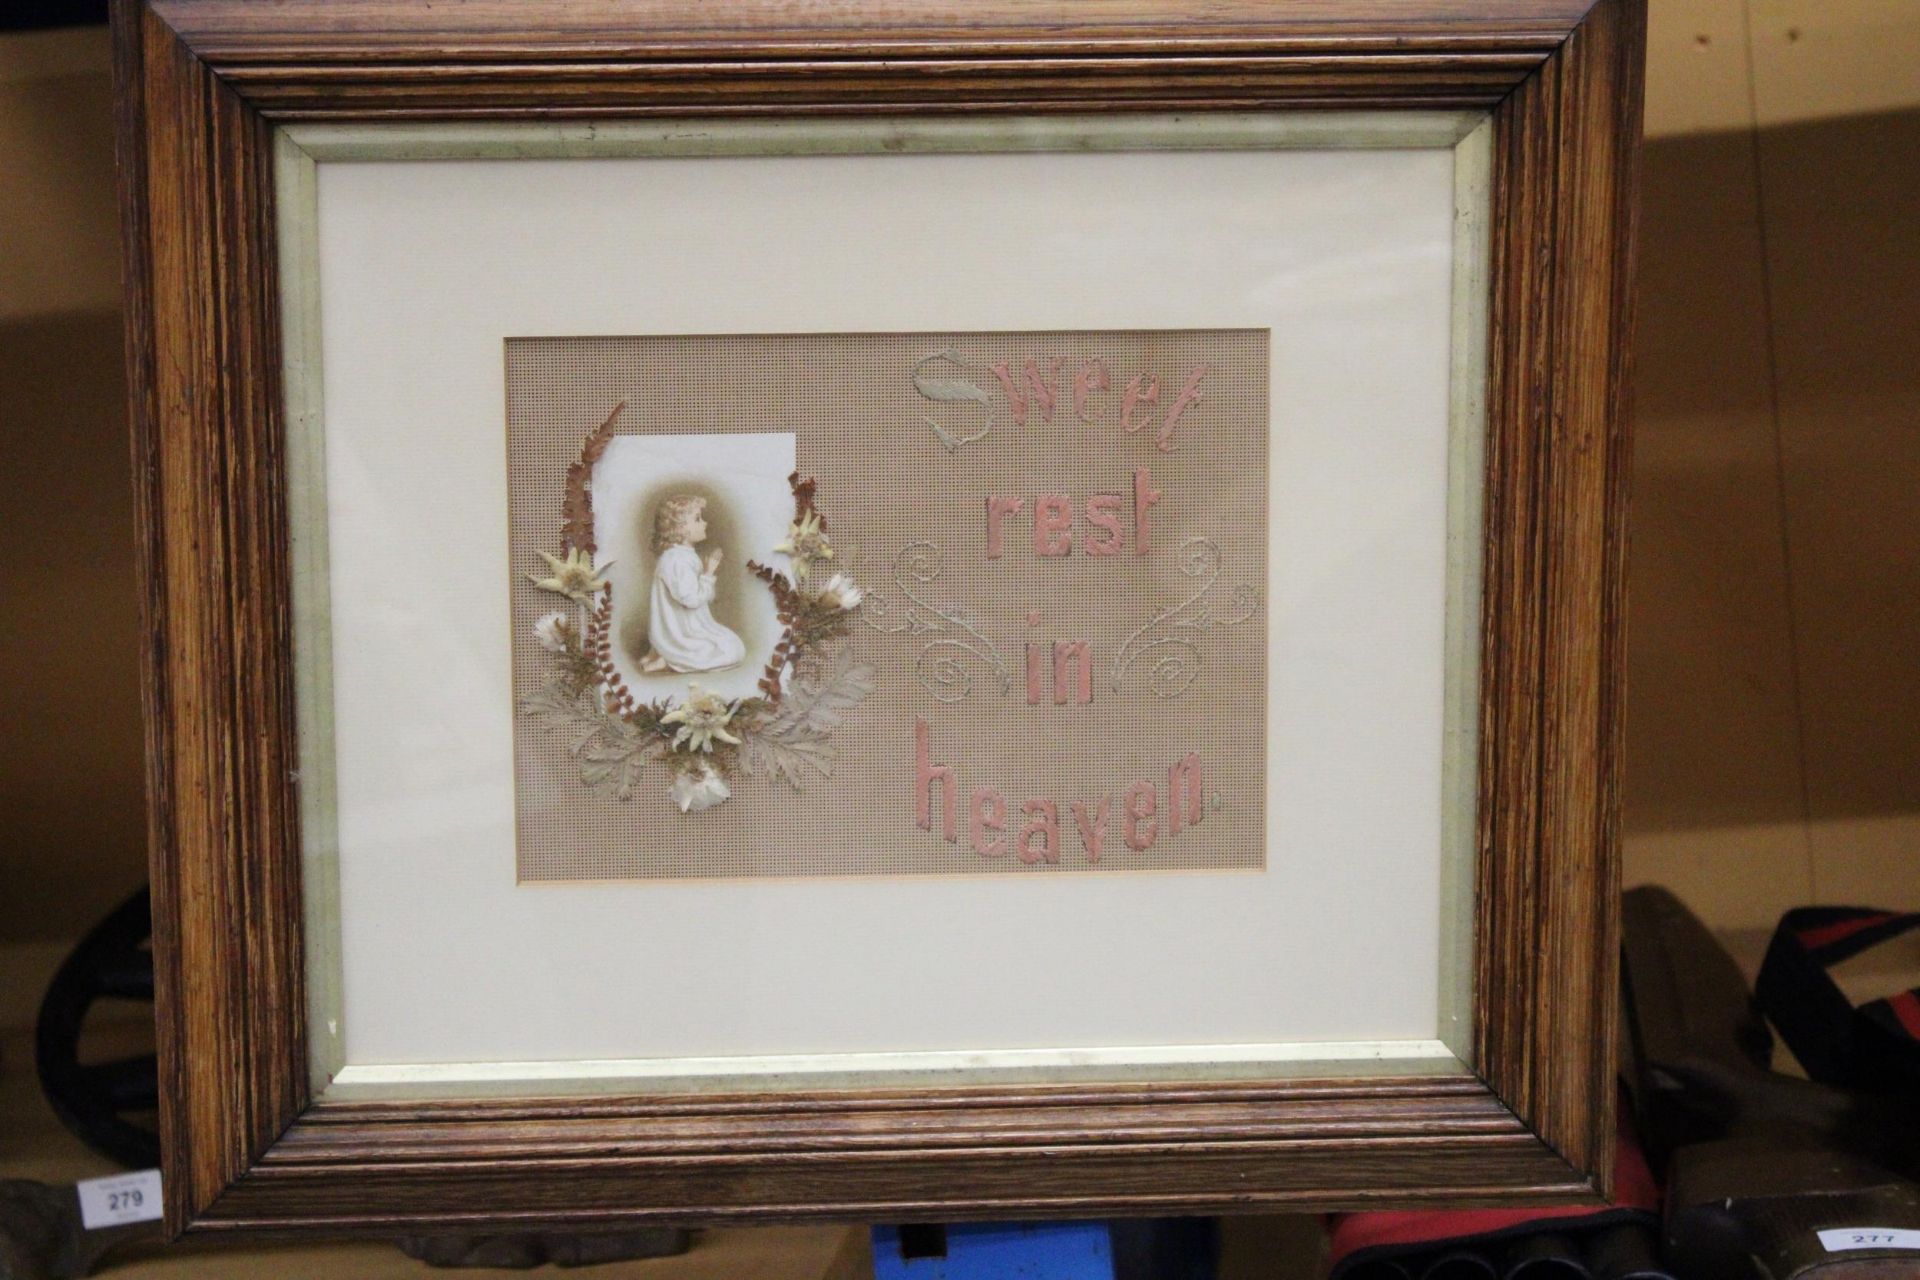 A PAIR OF VINTAGE FRAMED EMBROIDERED PICTURES WITH IMAGES OF PRAYING CHILDREN SURROUNDED BY - Image 3 of 5